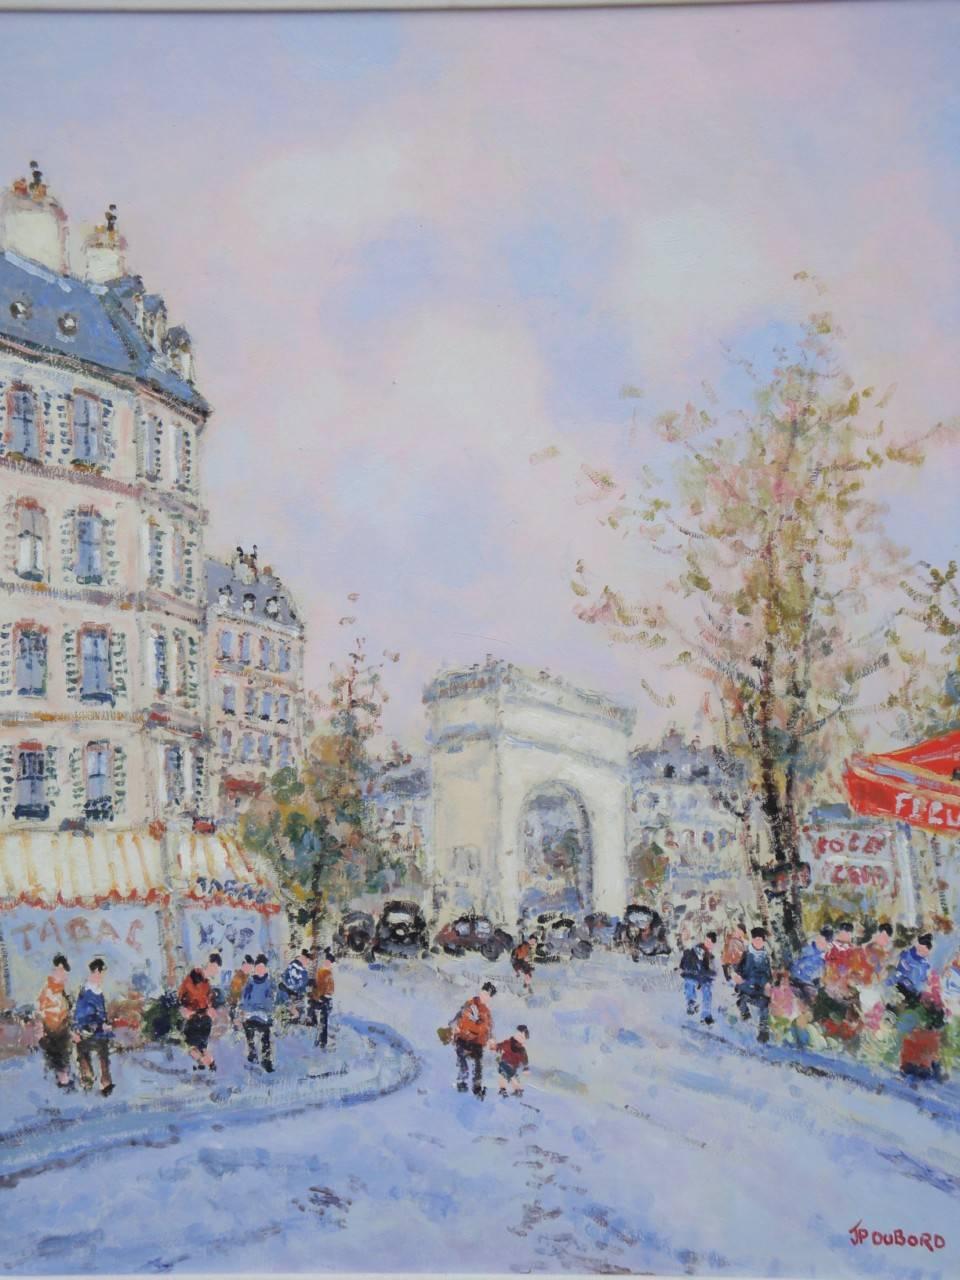 A beautiful original oil on canvas painting, by wally Findlay artist jean Pierre Dubord painting features the world famous champs Elysees in Paris France. Beautifully done with magnificent colors! Gallery retail $9,500. Magnificently done and framed